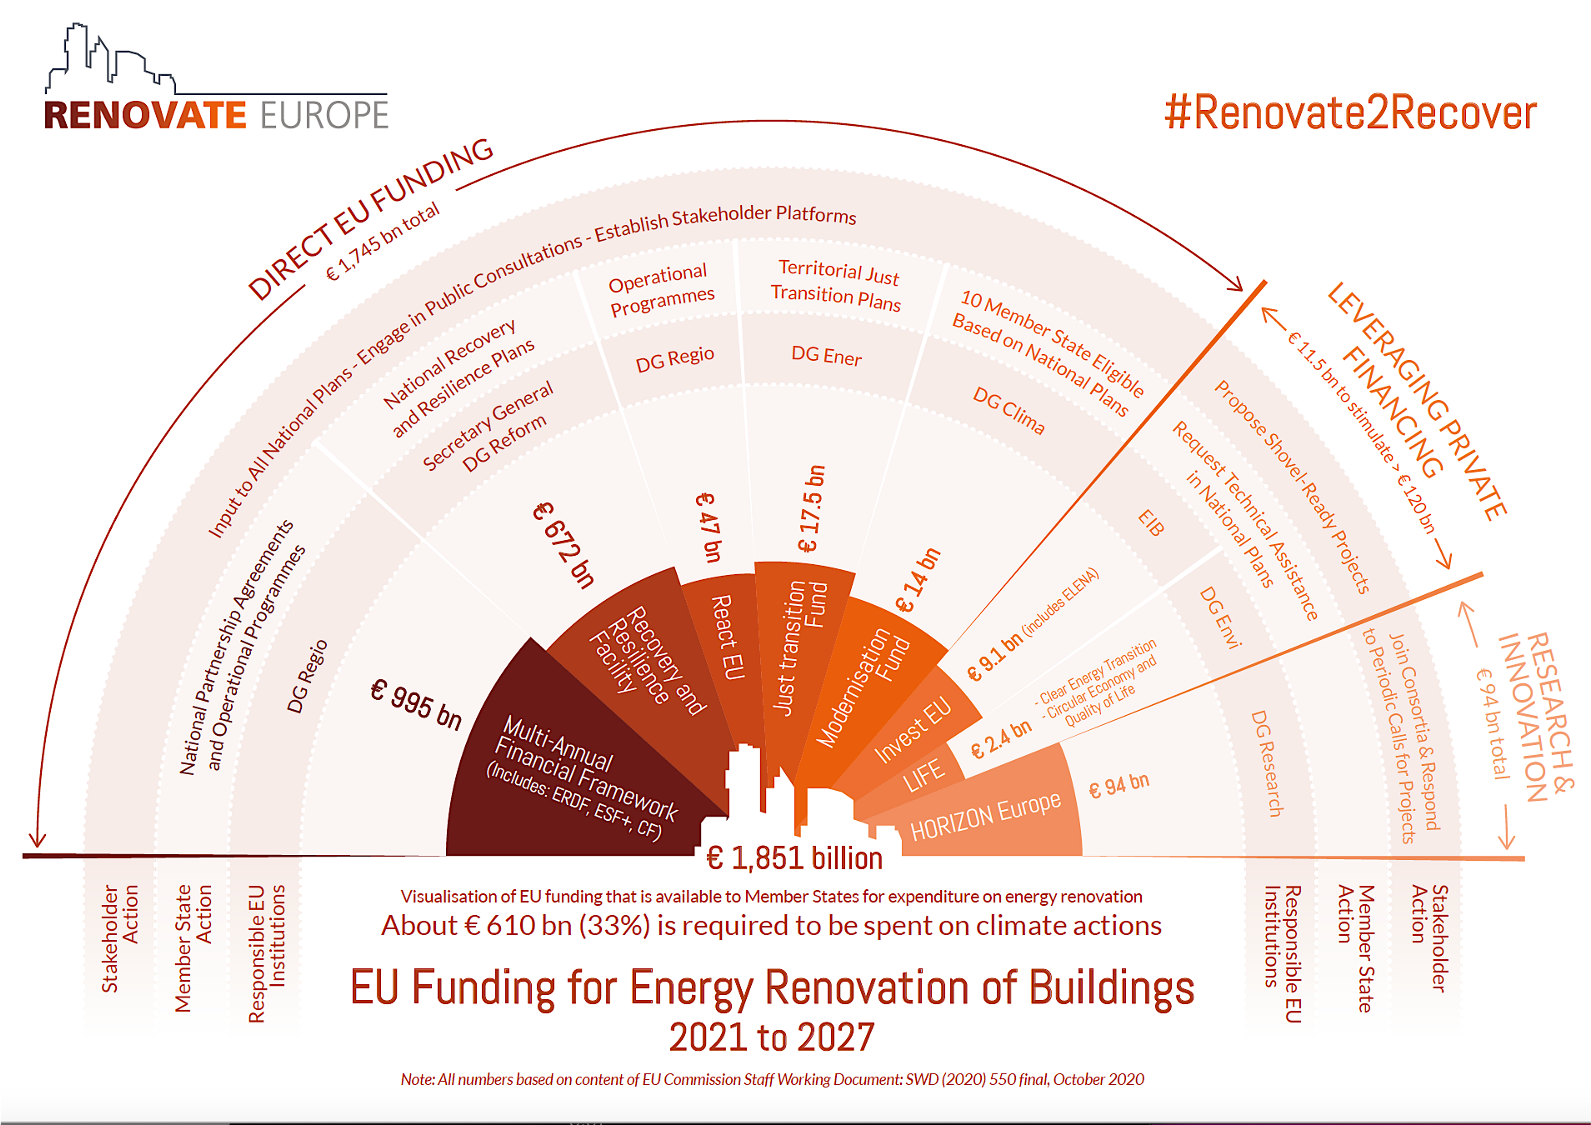 Graphic depicting different sources of EU funding for energy renovation of buildings 2021 to 2027